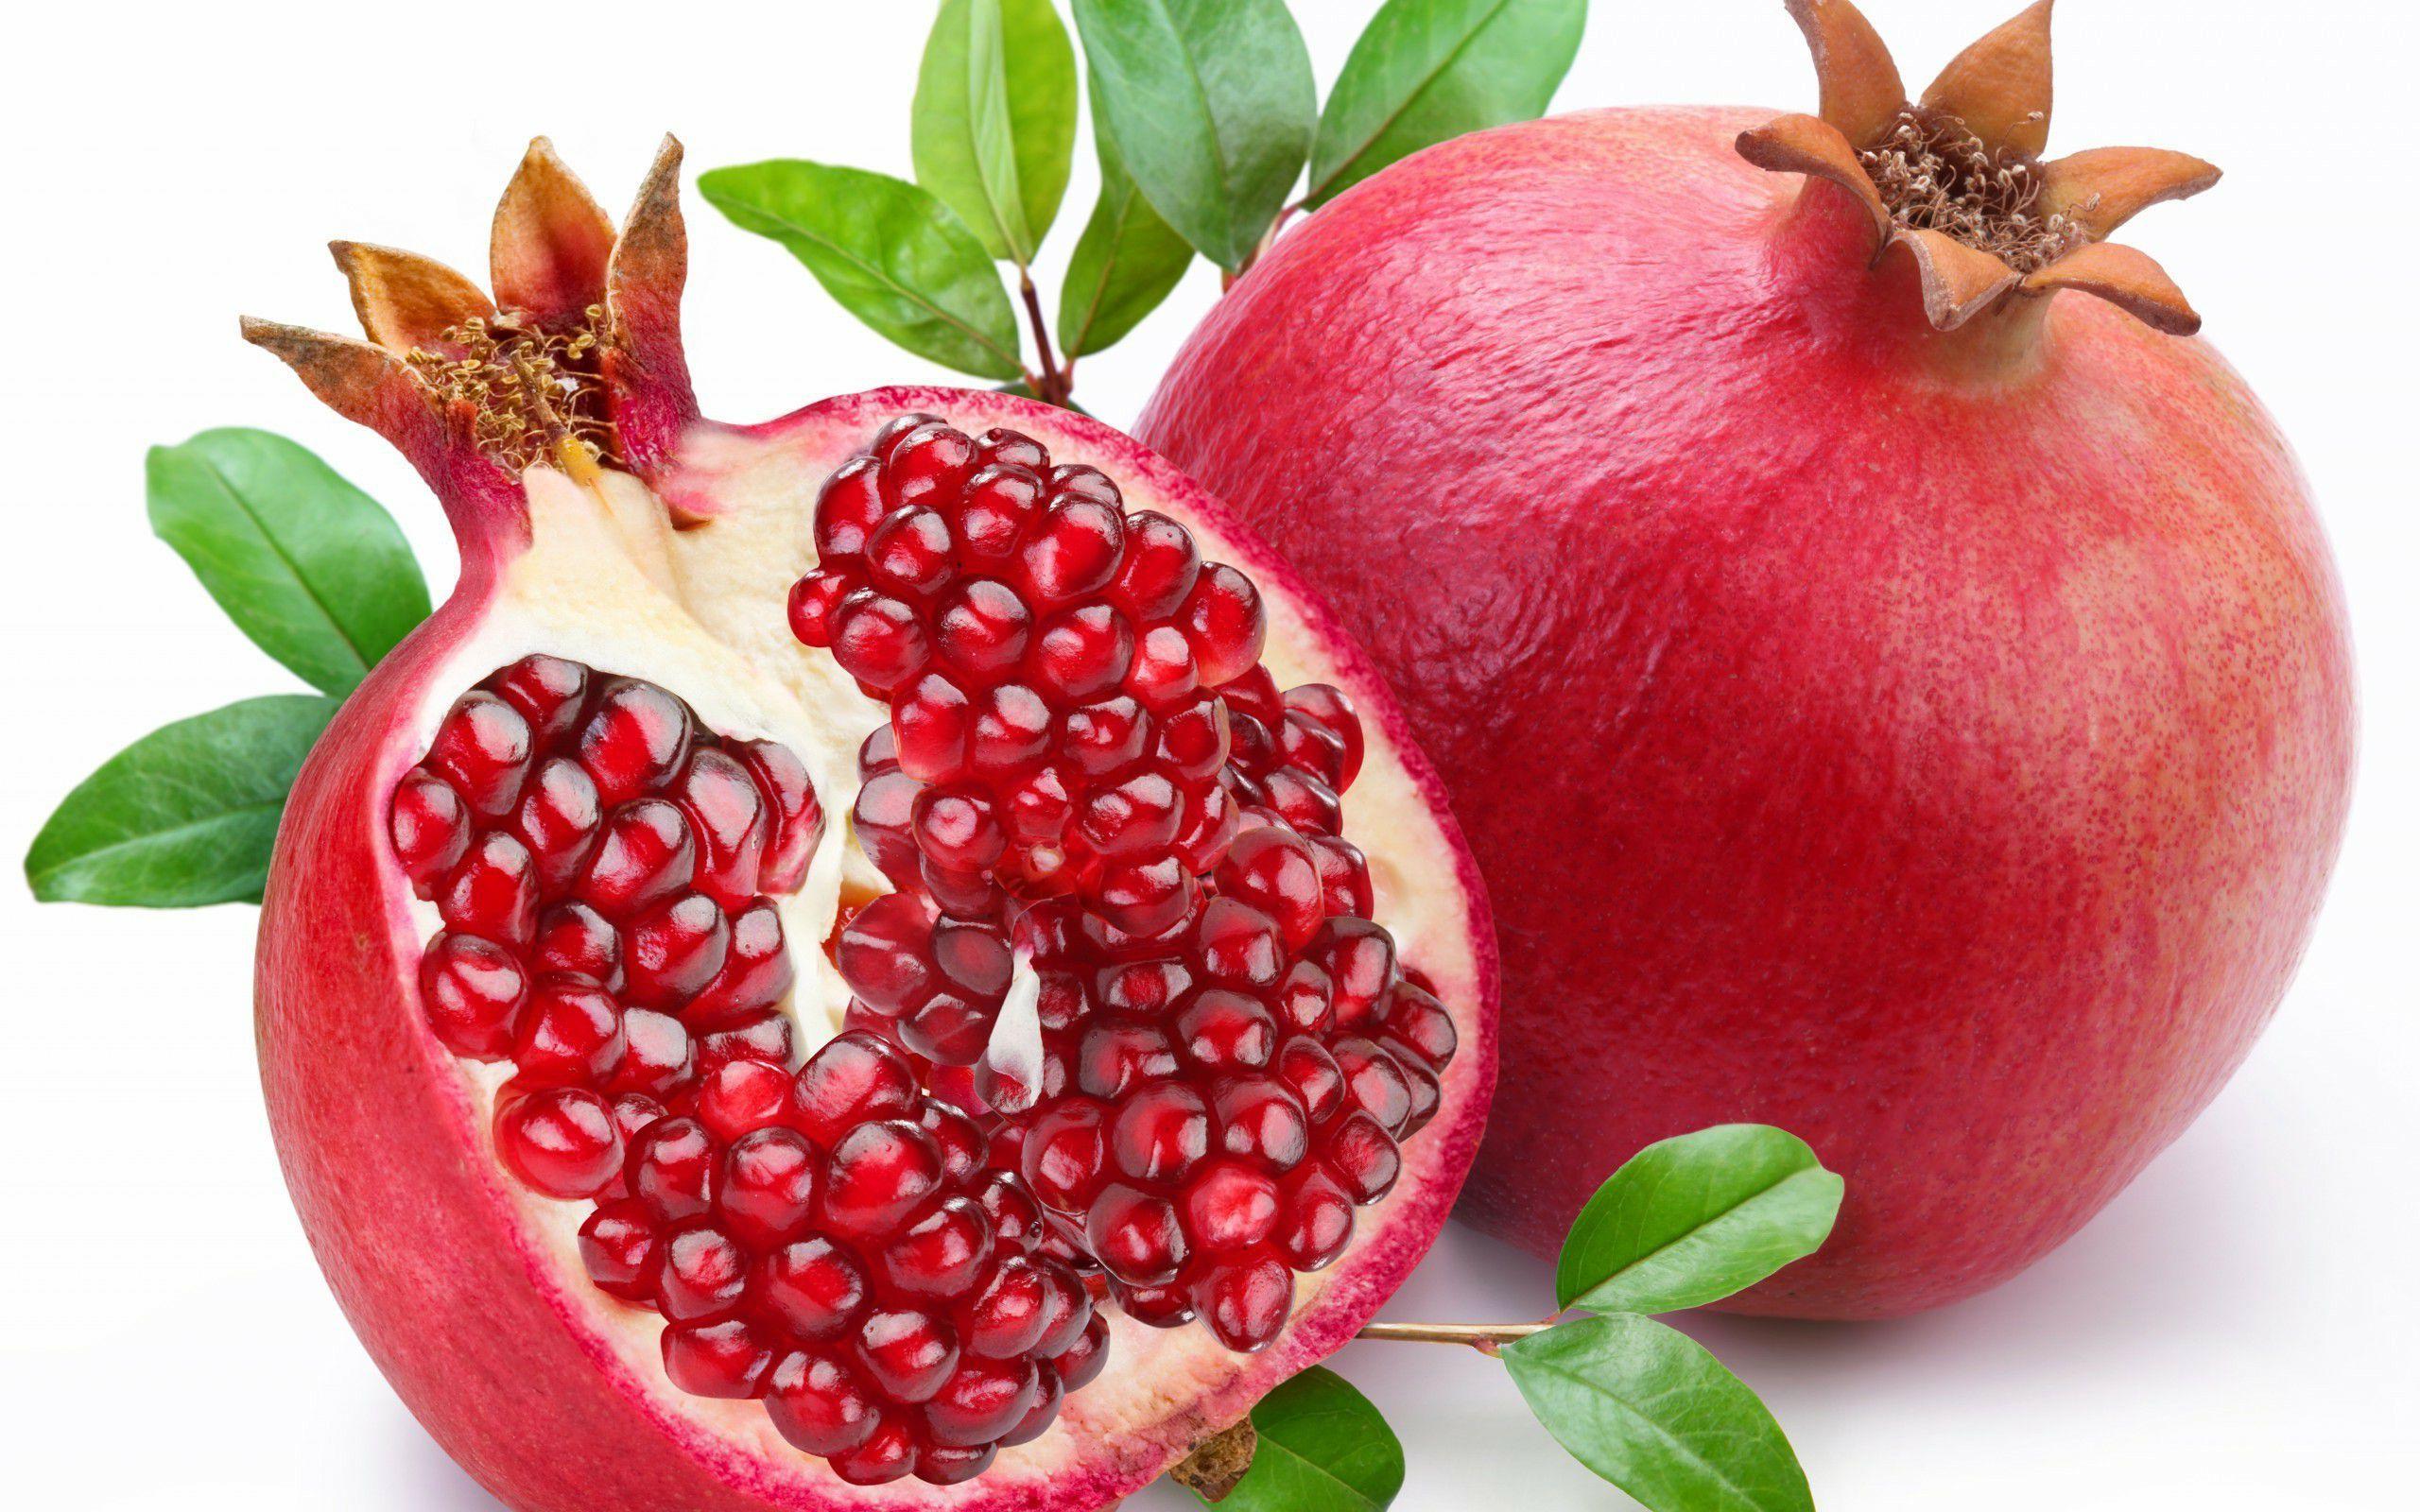 Pomegranate Wallpaper Vector Images over 2000